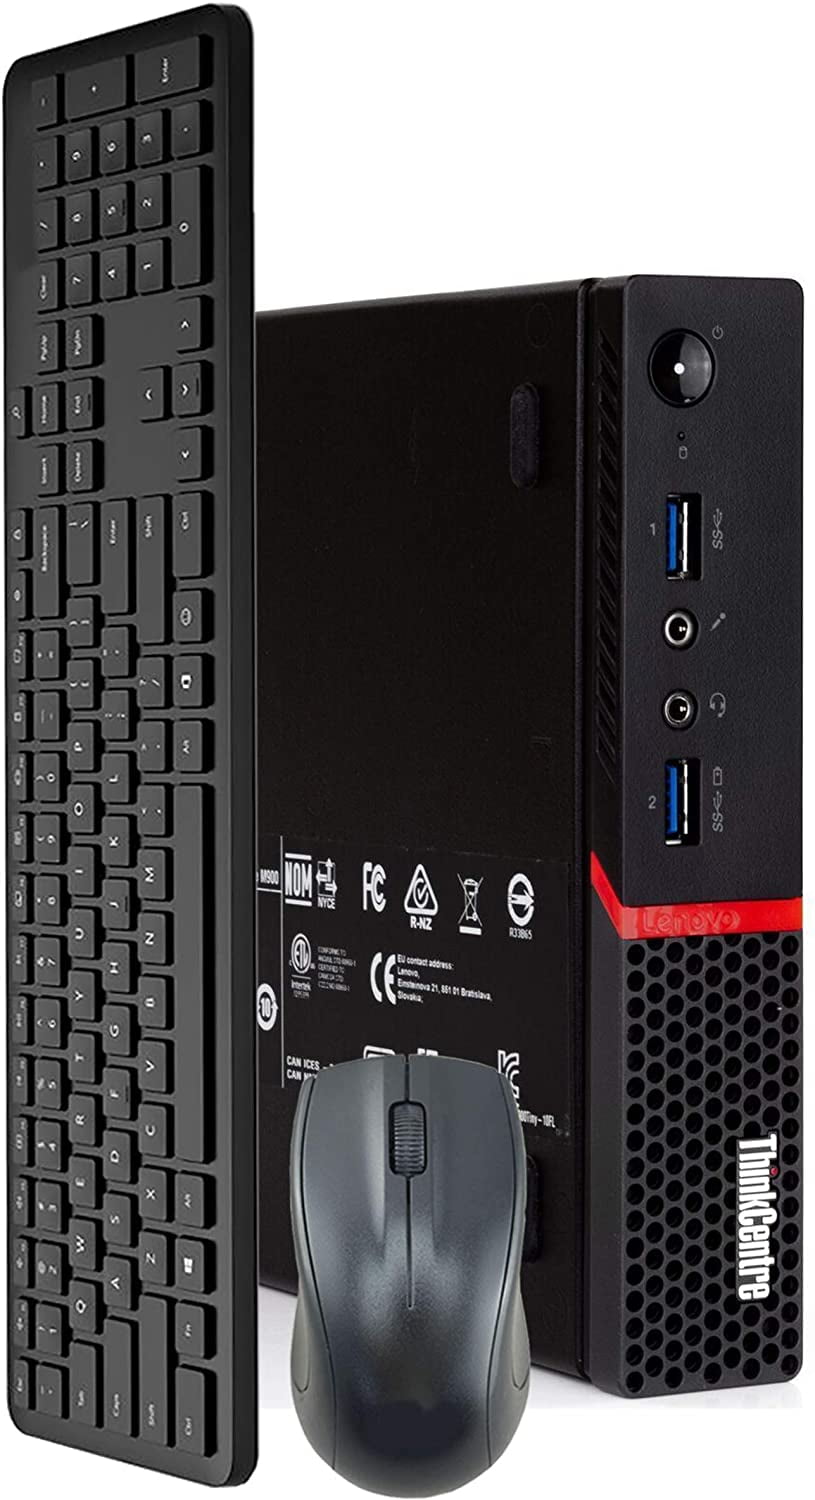 Intel Core i5-3470 up to 3.6GHz Lenovo ThinkCentre M82 SFF High Performance Business Desktop Computer 16GB DDR3 Windows 10 Professional 240GB SSD Renewed DVD 